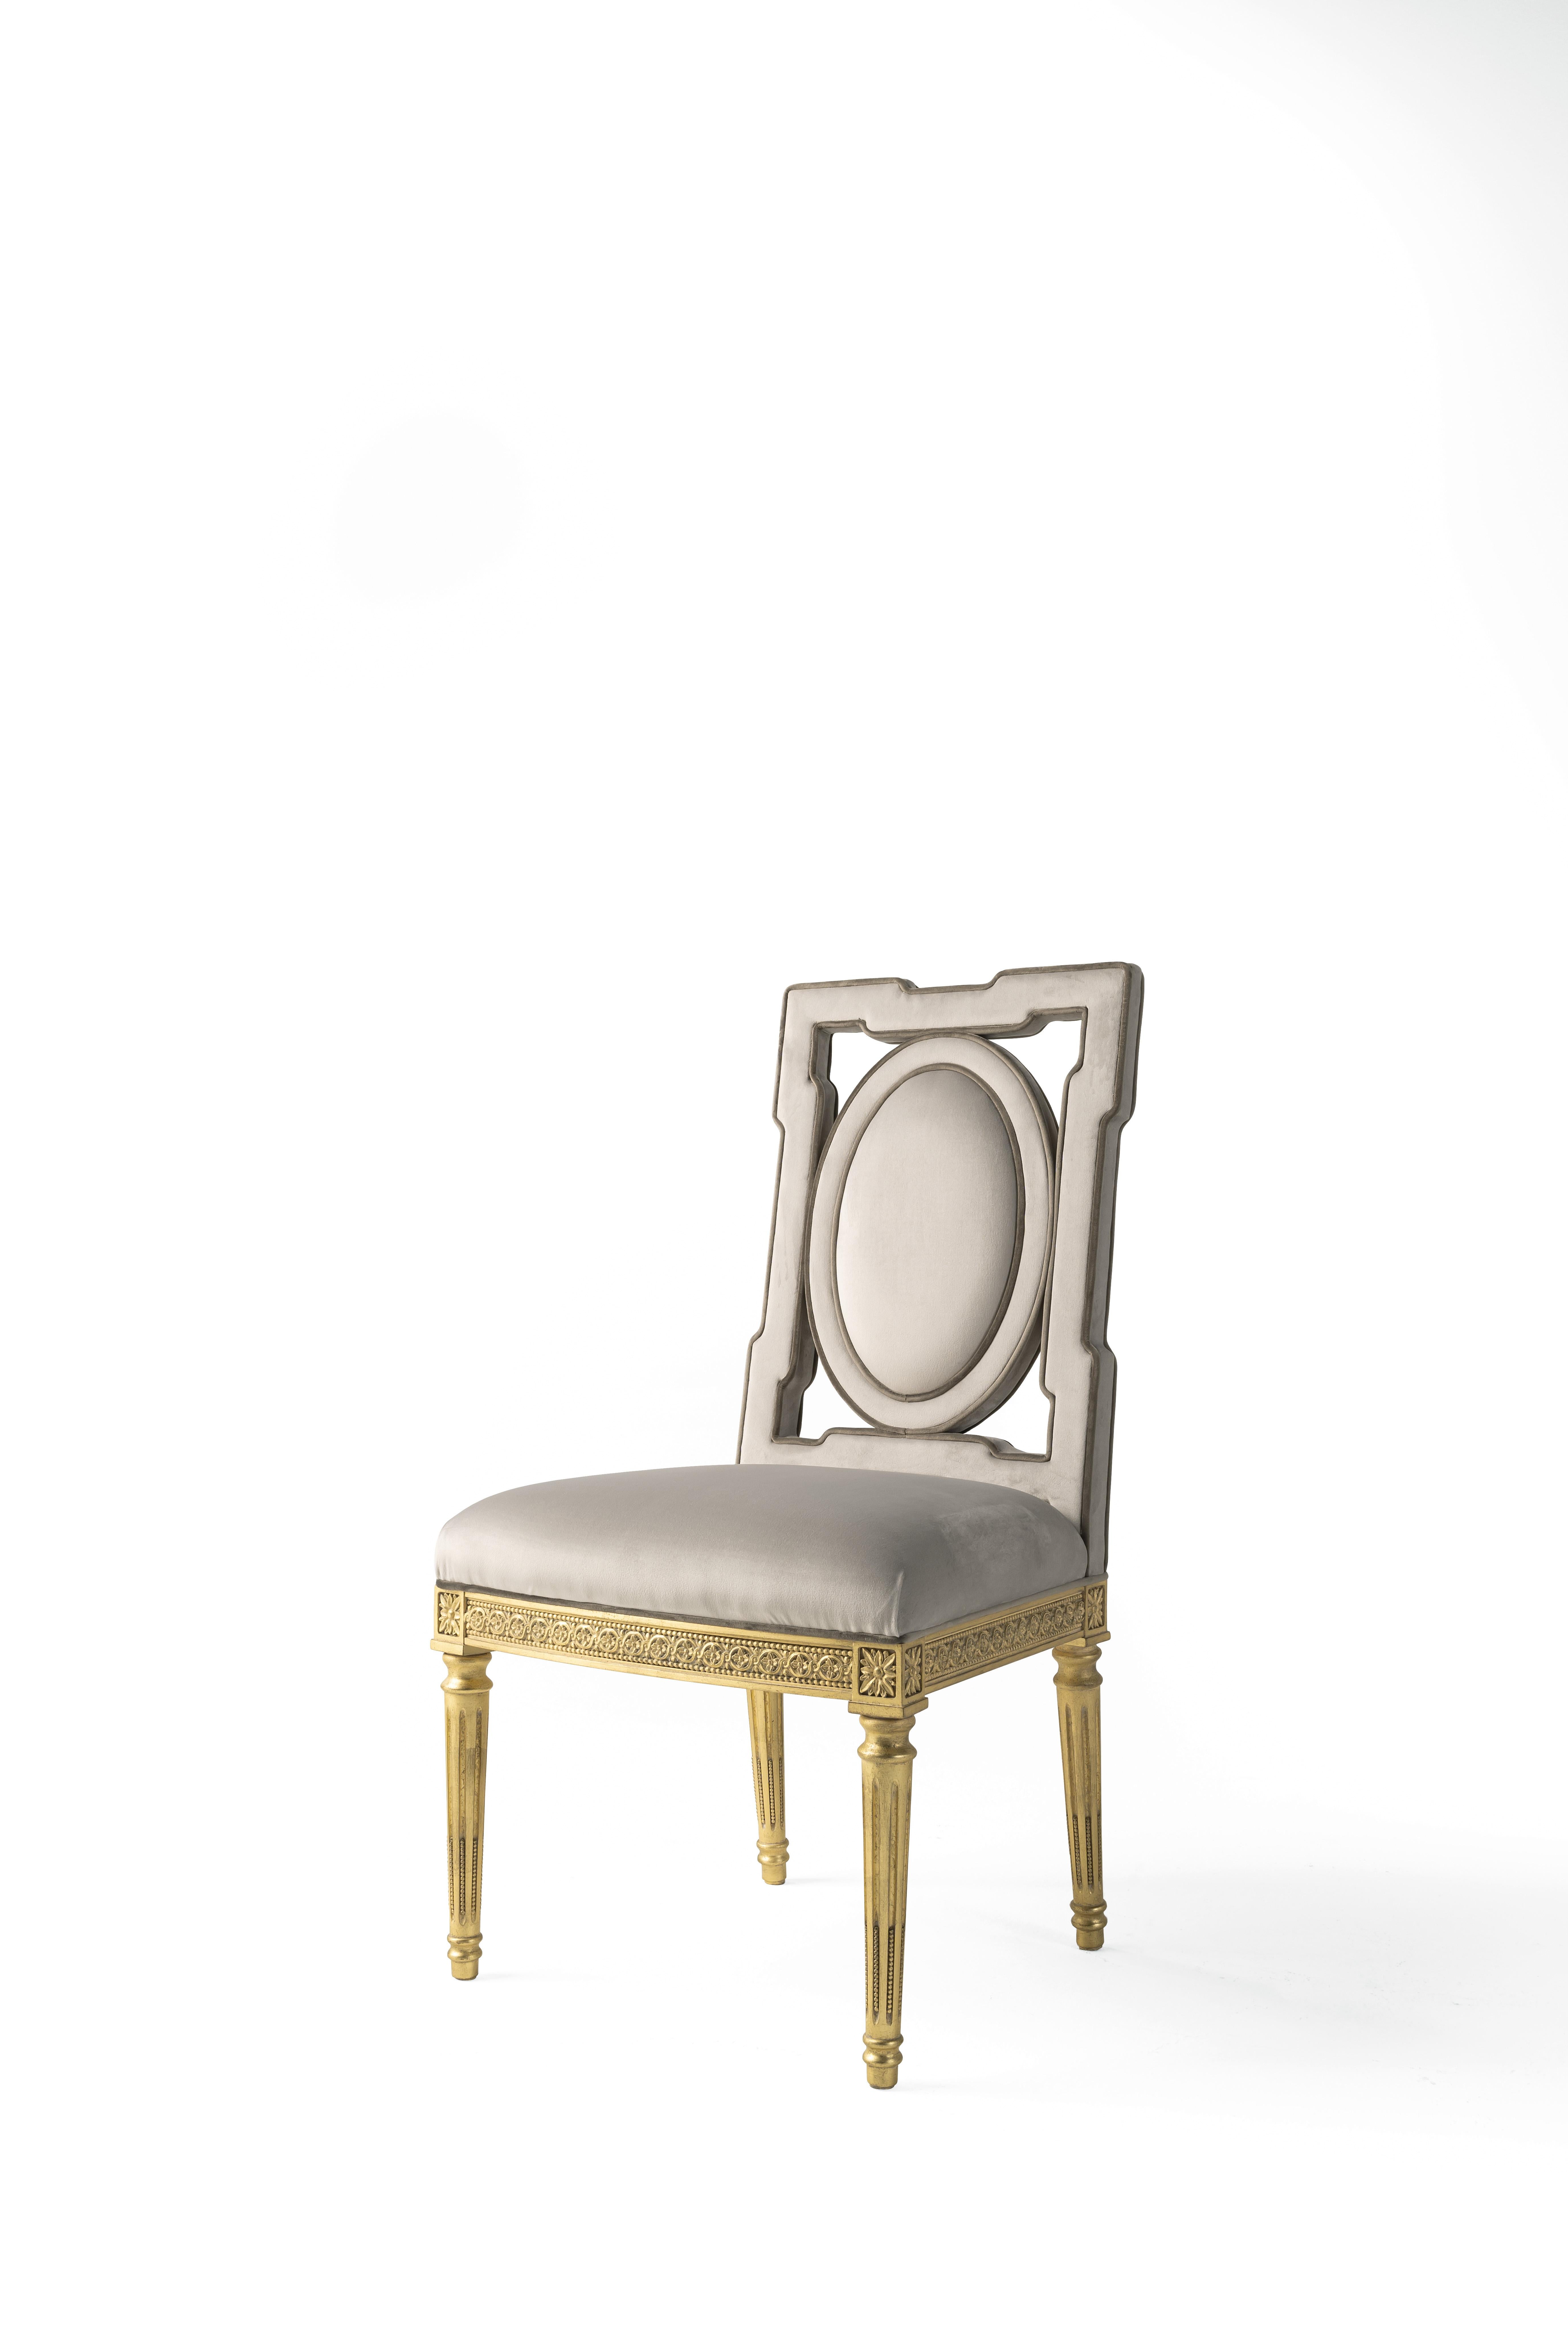 Satin is a classic model in Louis XVI style, revisited in a modern key thanks to the velvet upholstery in a delicate shade of grey. It features a hand-carved wooden structure with gold leaf finish and a medallion backrest with piping that emphasizes